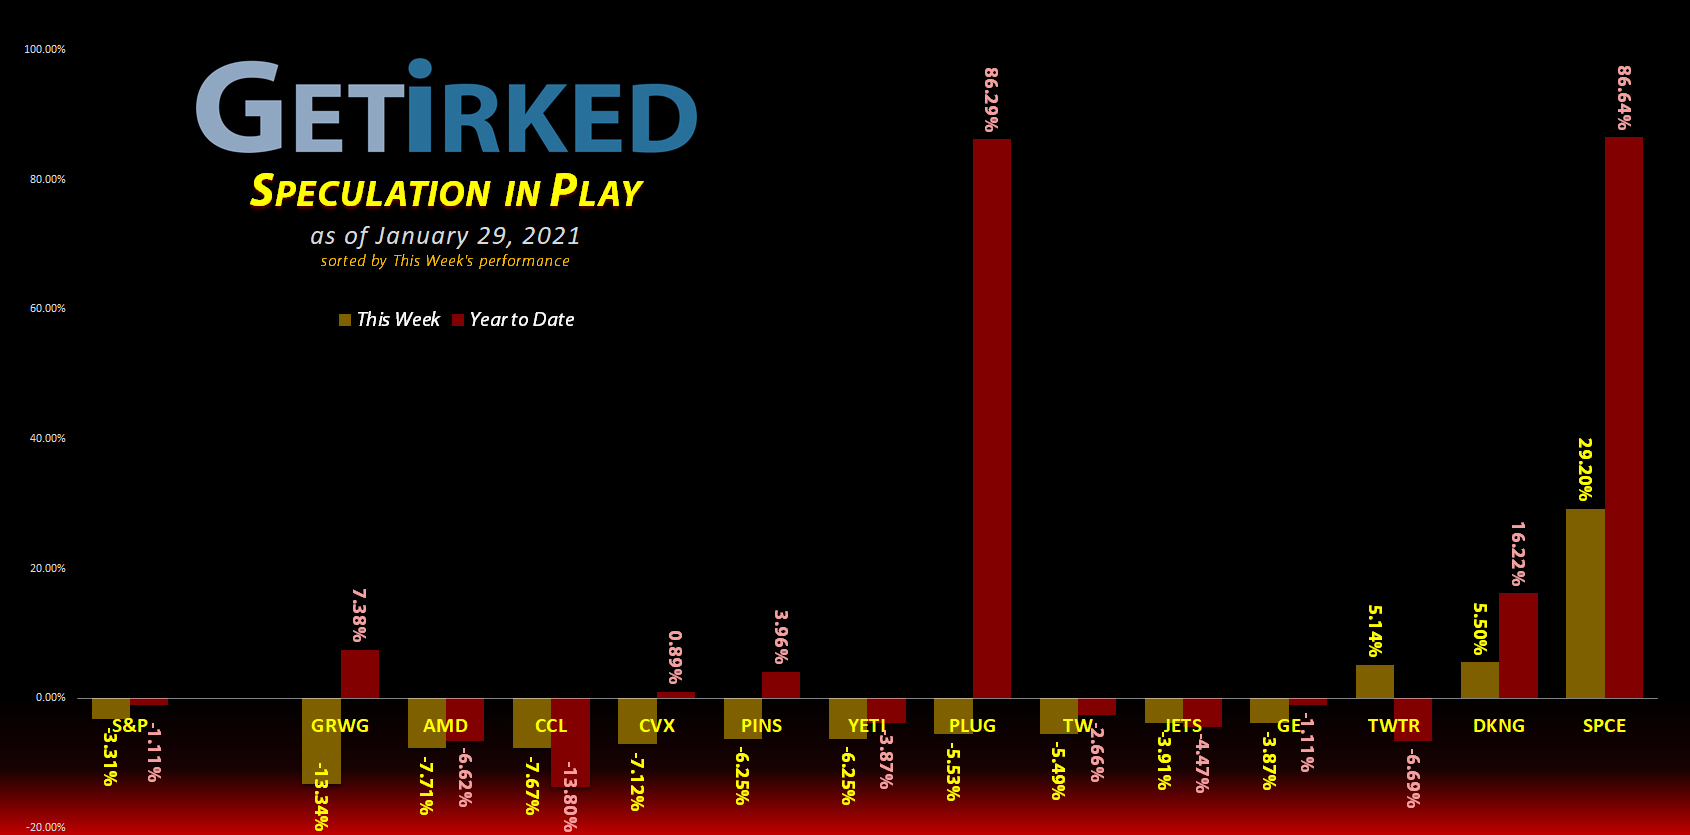 Get Irked's Speculation in Play - January 29, 2021